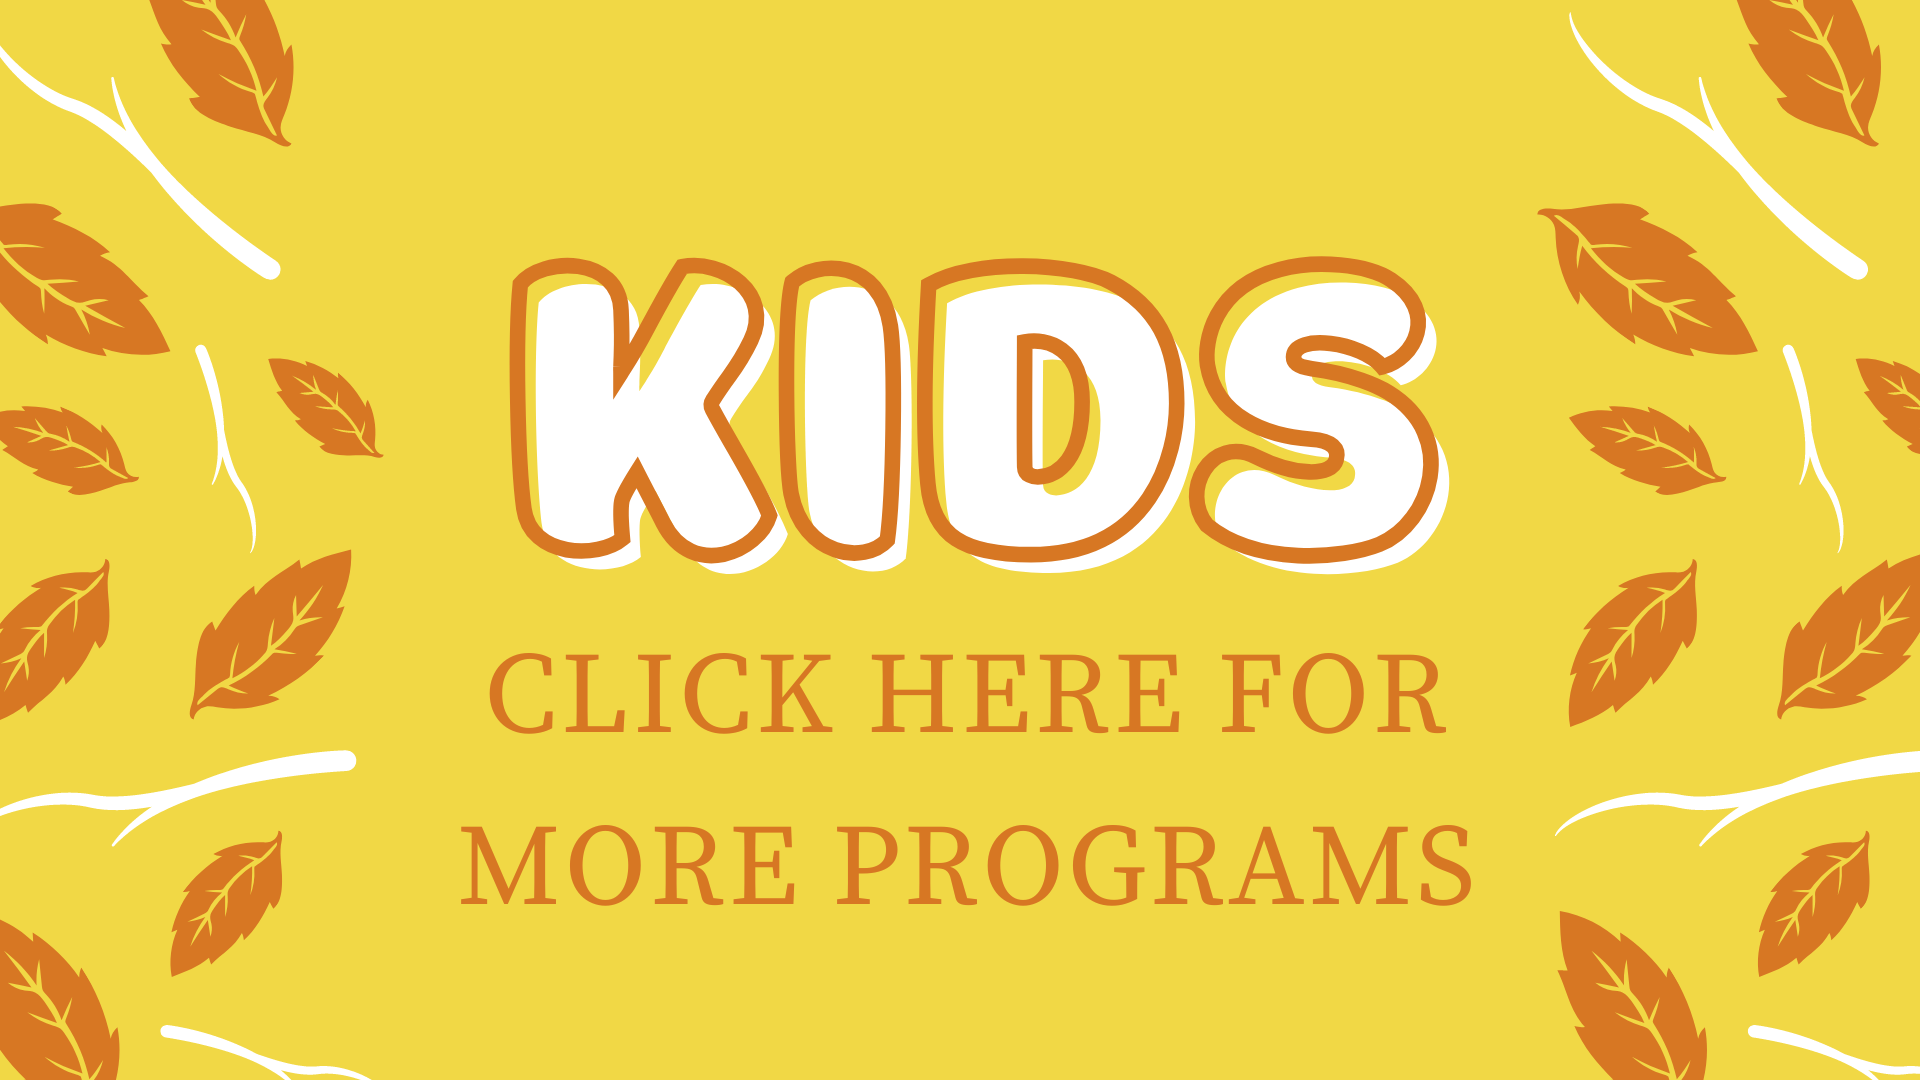 Click Here for more kid's programs